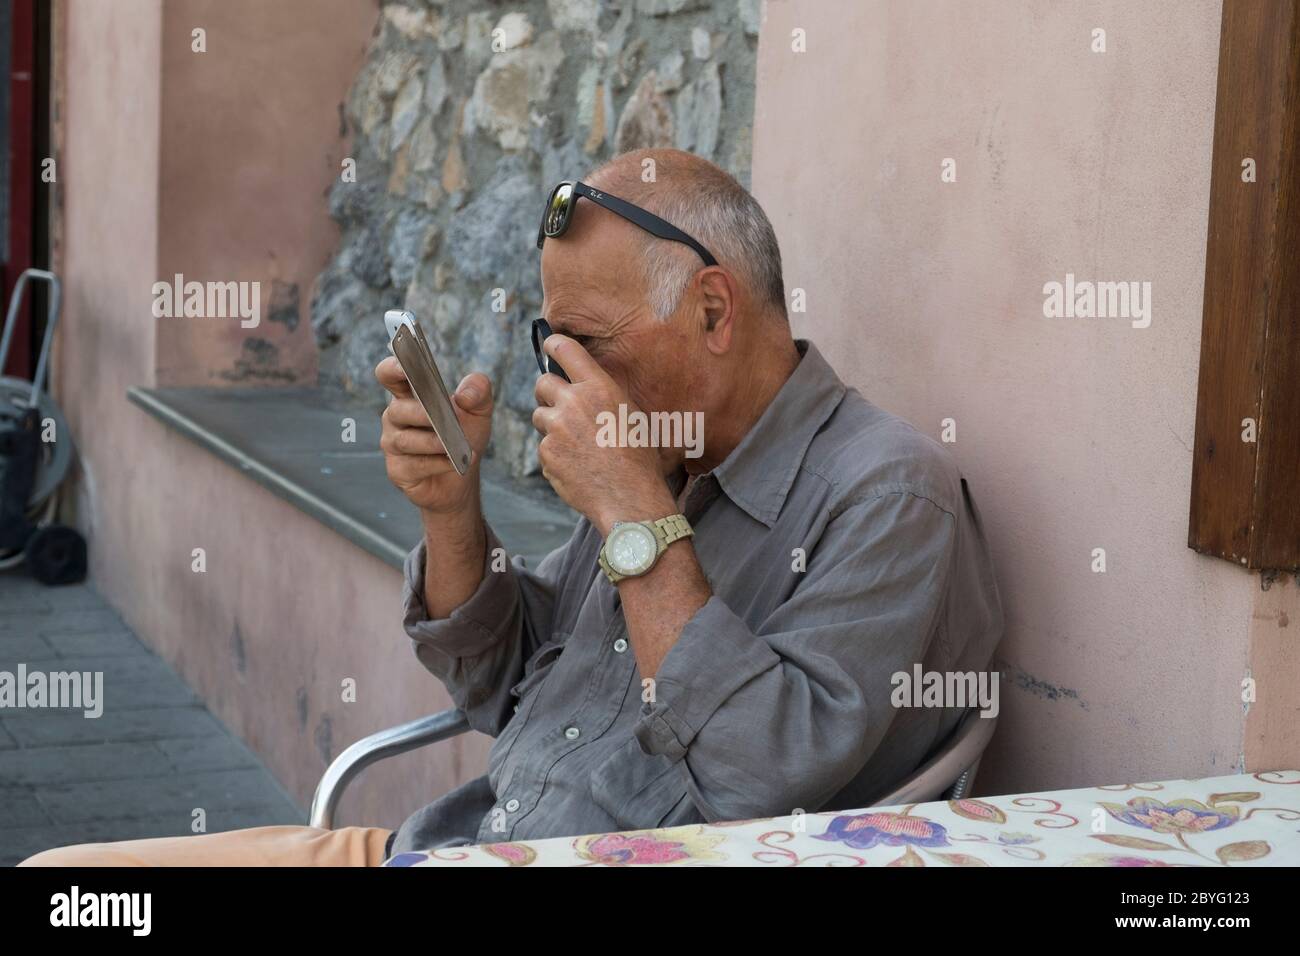 A man needs magnifying glasses to read. Stock Photo